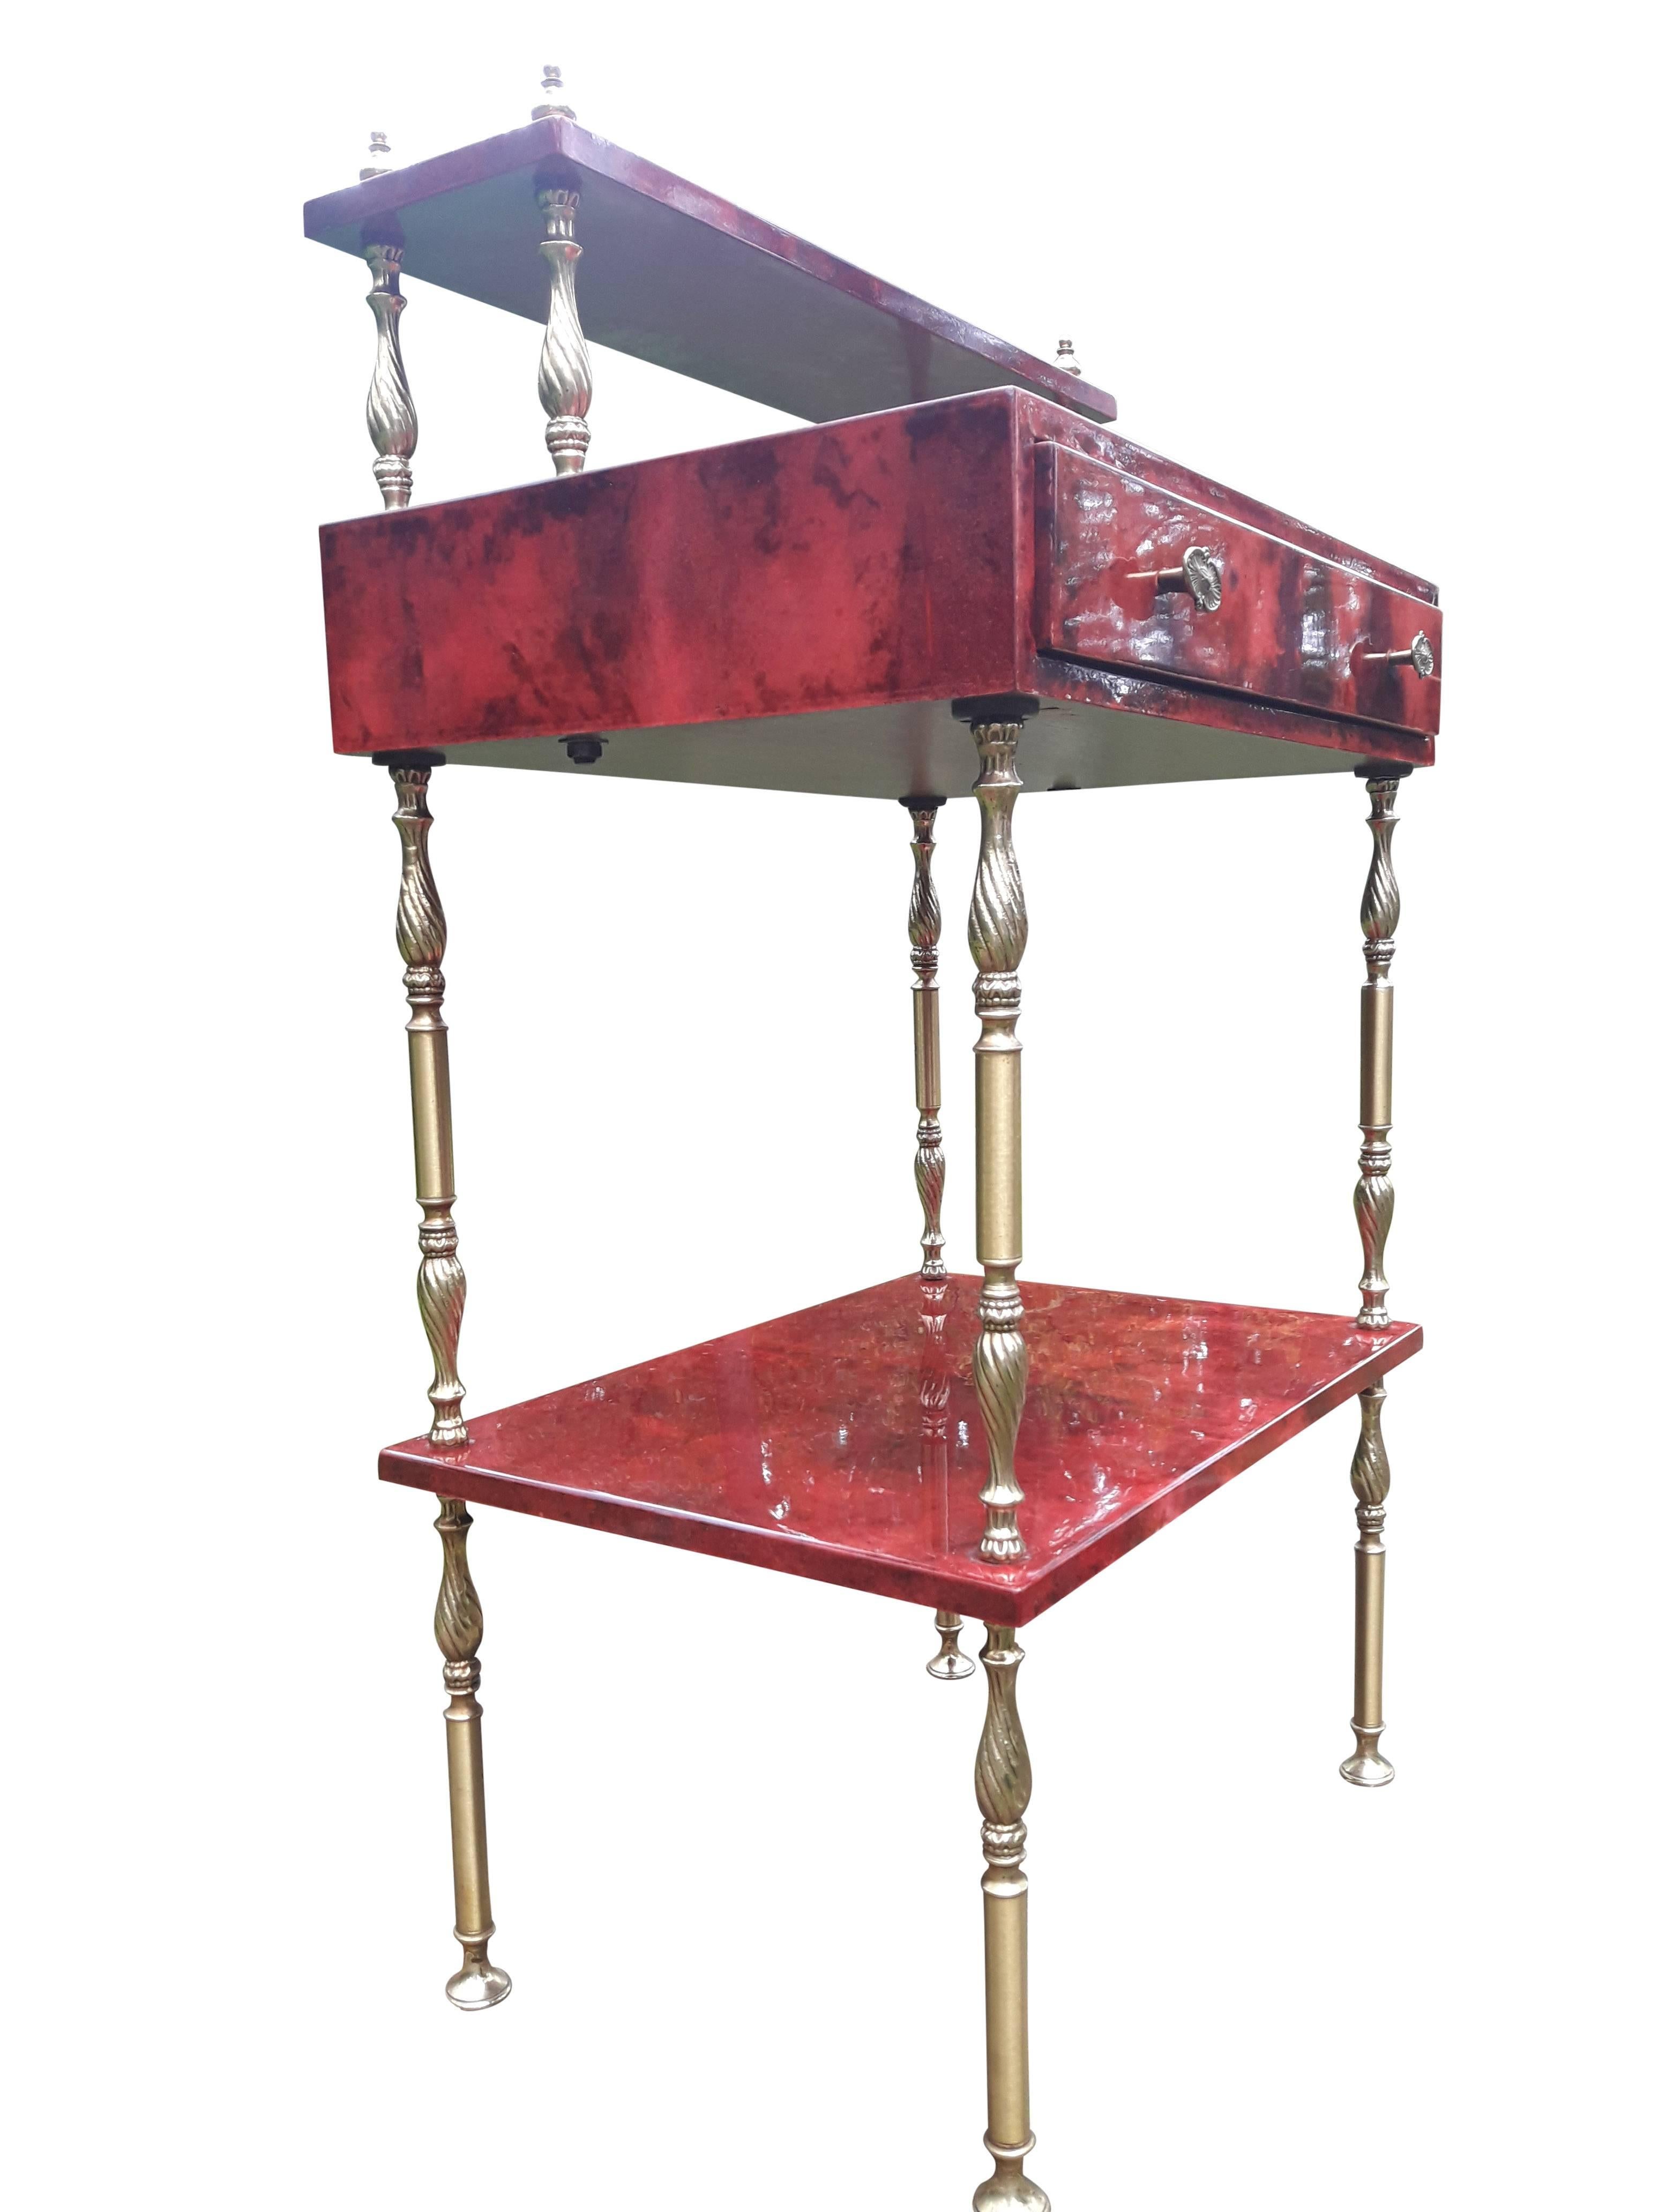 Aldo Tura red goatskin parchment side table with one drawer(scratch, see pict).
The table consisting to three levels and a drawer. 
Nice brass details. 
Aldo Tura started in the 1930s and fully developed in the 1950s a successful business